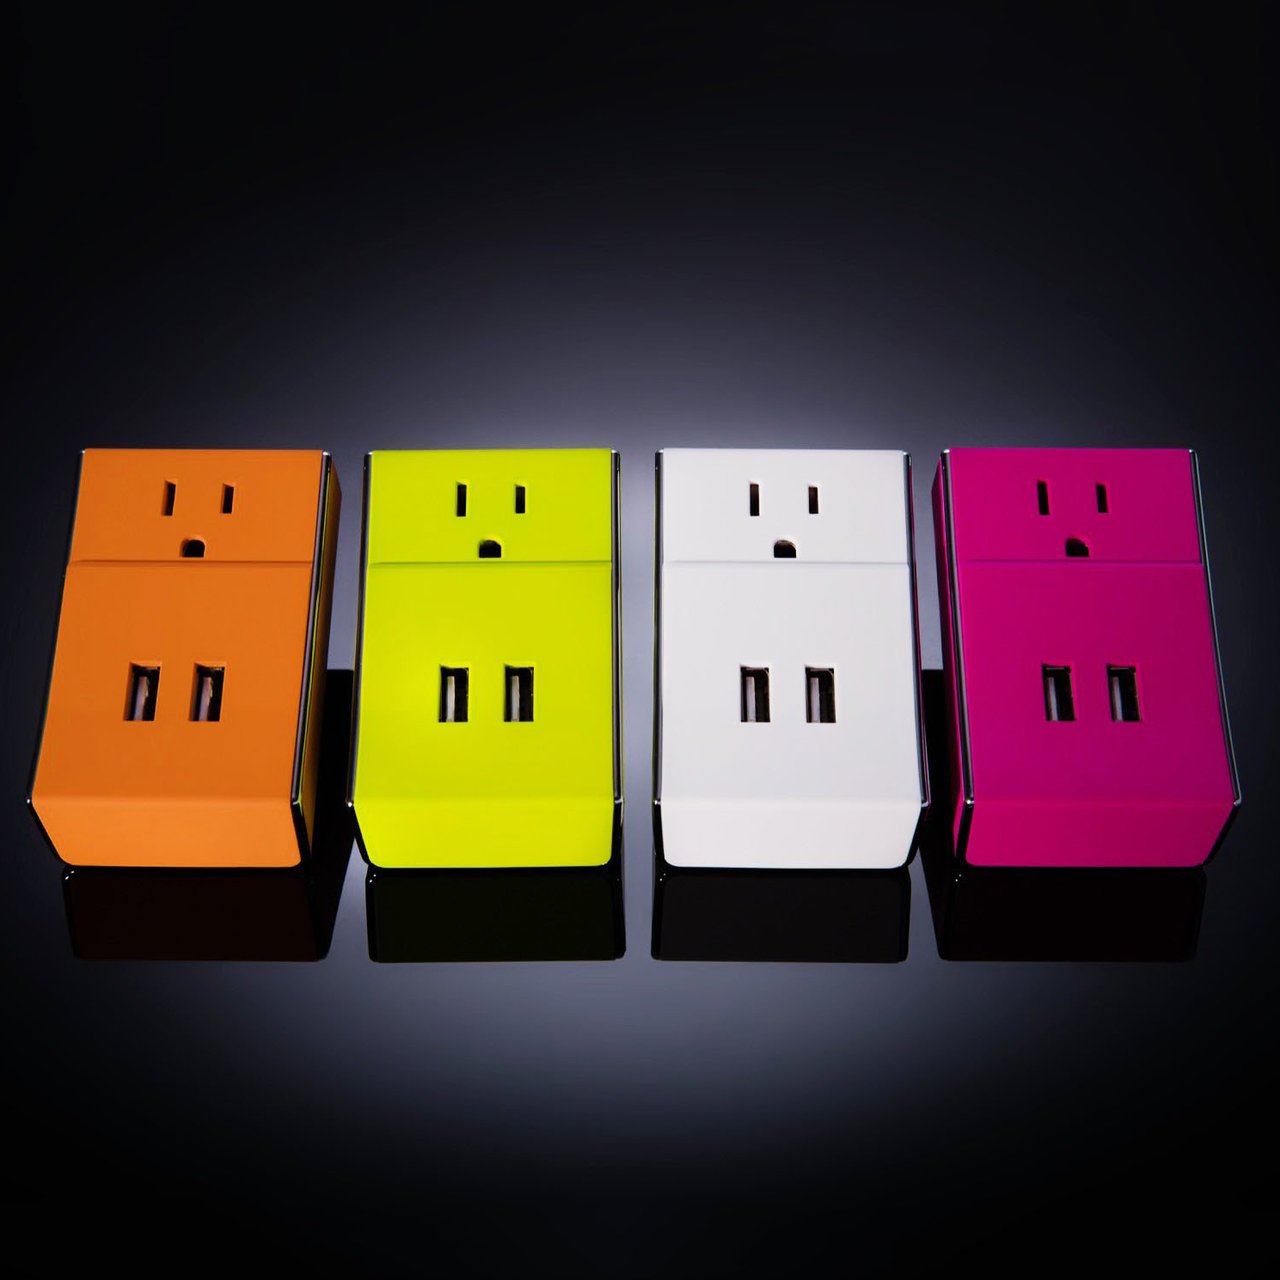 WALLY Dual USB Wall Charger + Standard AC Outlet by Schatzii